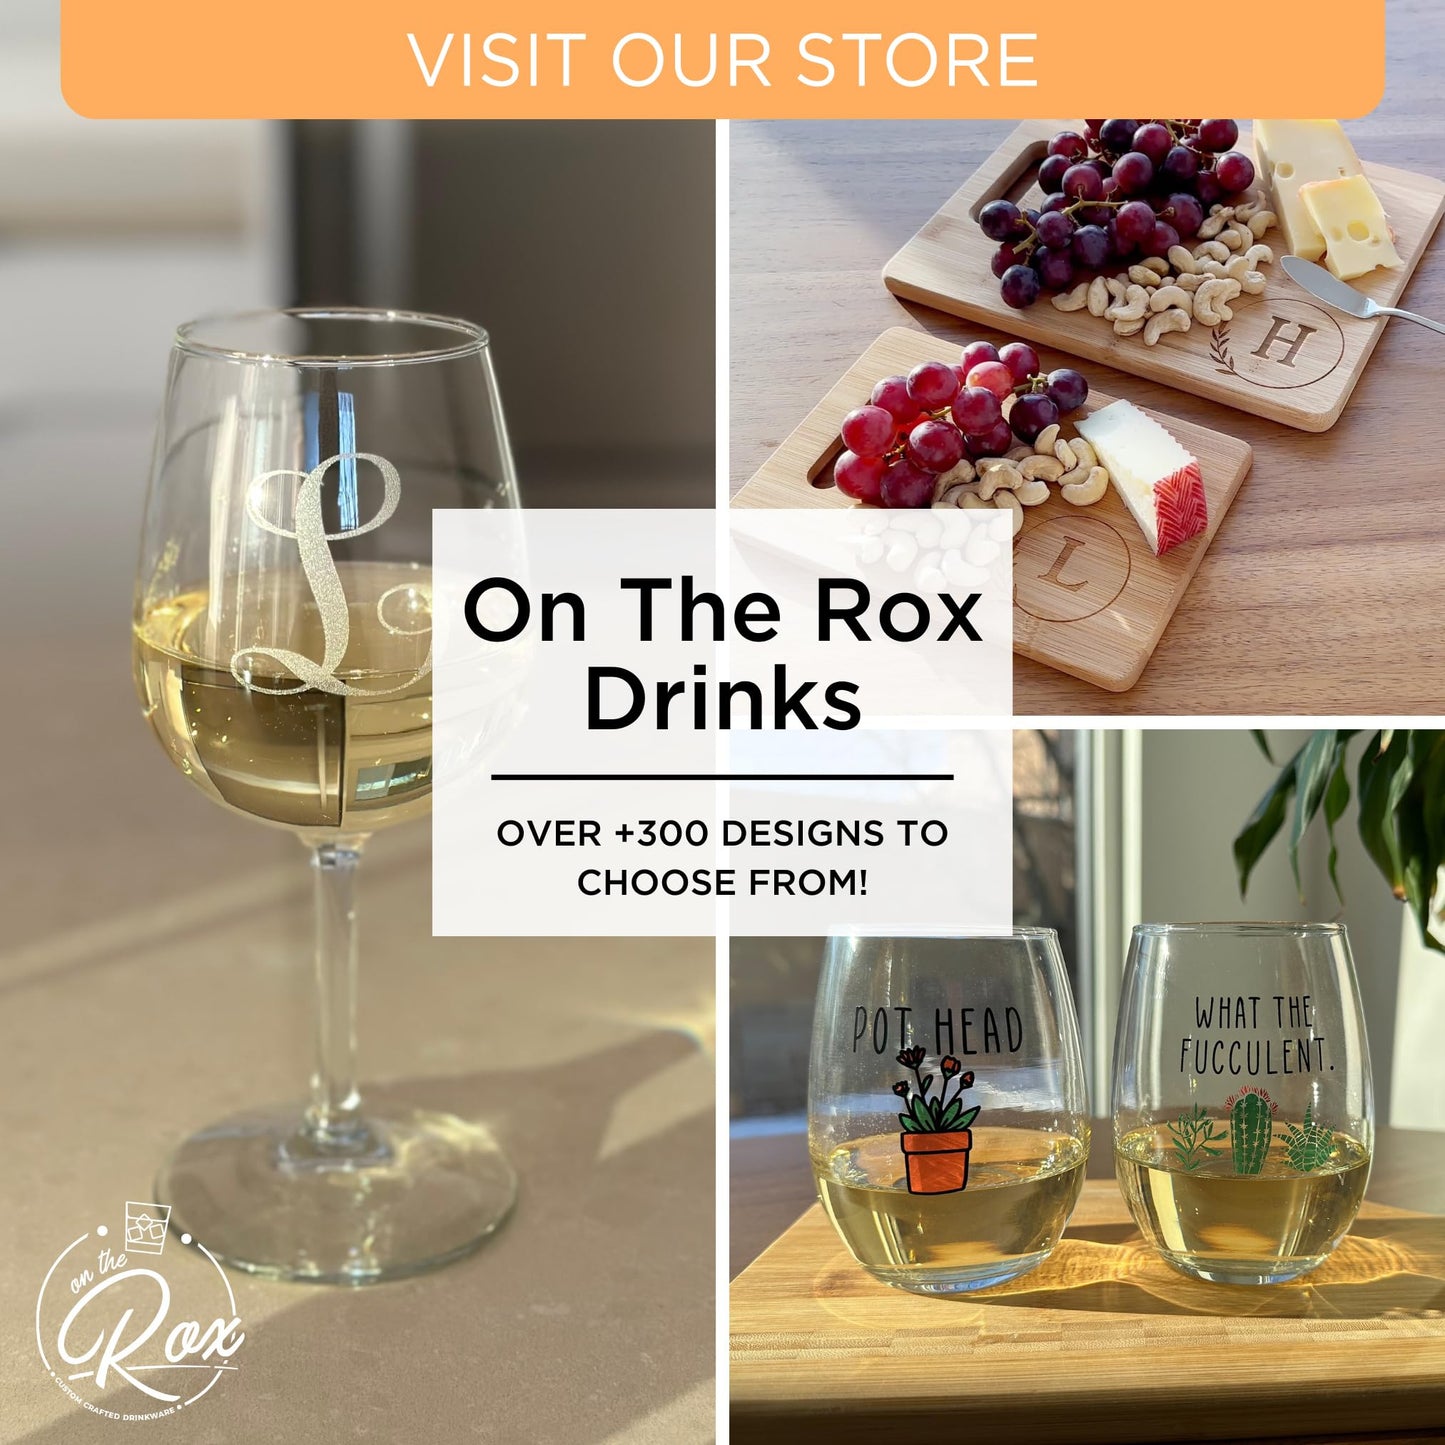 On The Rox Drinks Customized Beer Can Glass-Personalized-Birthday Beer Glass-Engraved-Vintage-Cheers-Aged To PERFECTION-Birthday Gift-Etched Beer Glass-Barware (1)